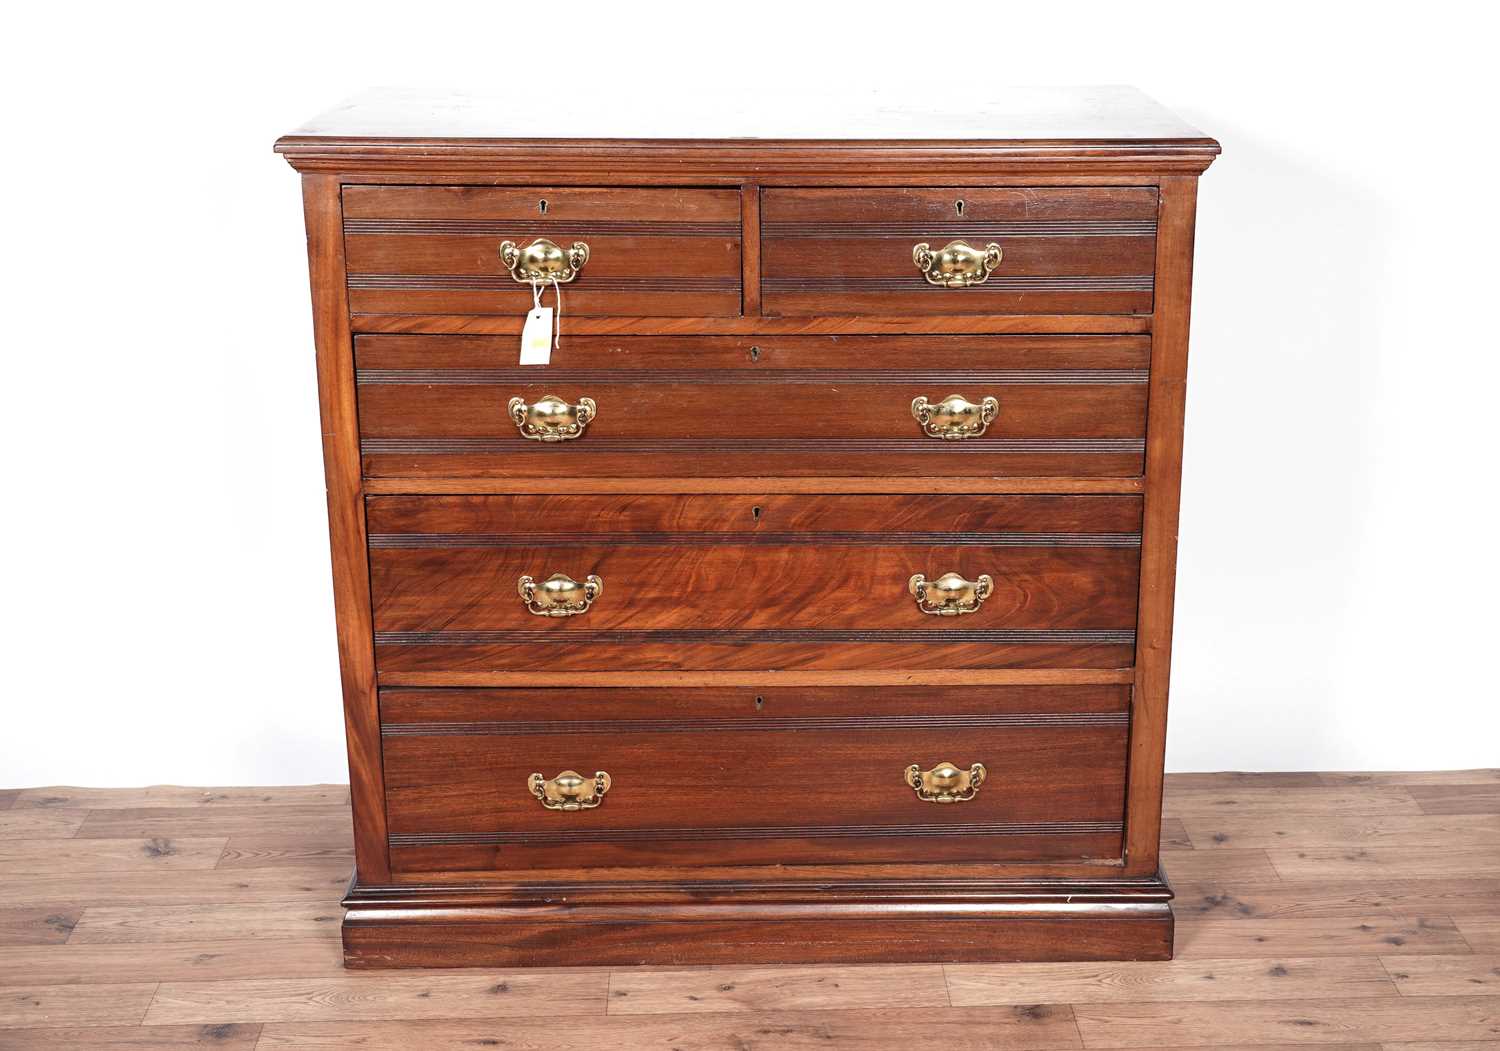 An Edwardian walnut chest of drawers - Image 2 of 4